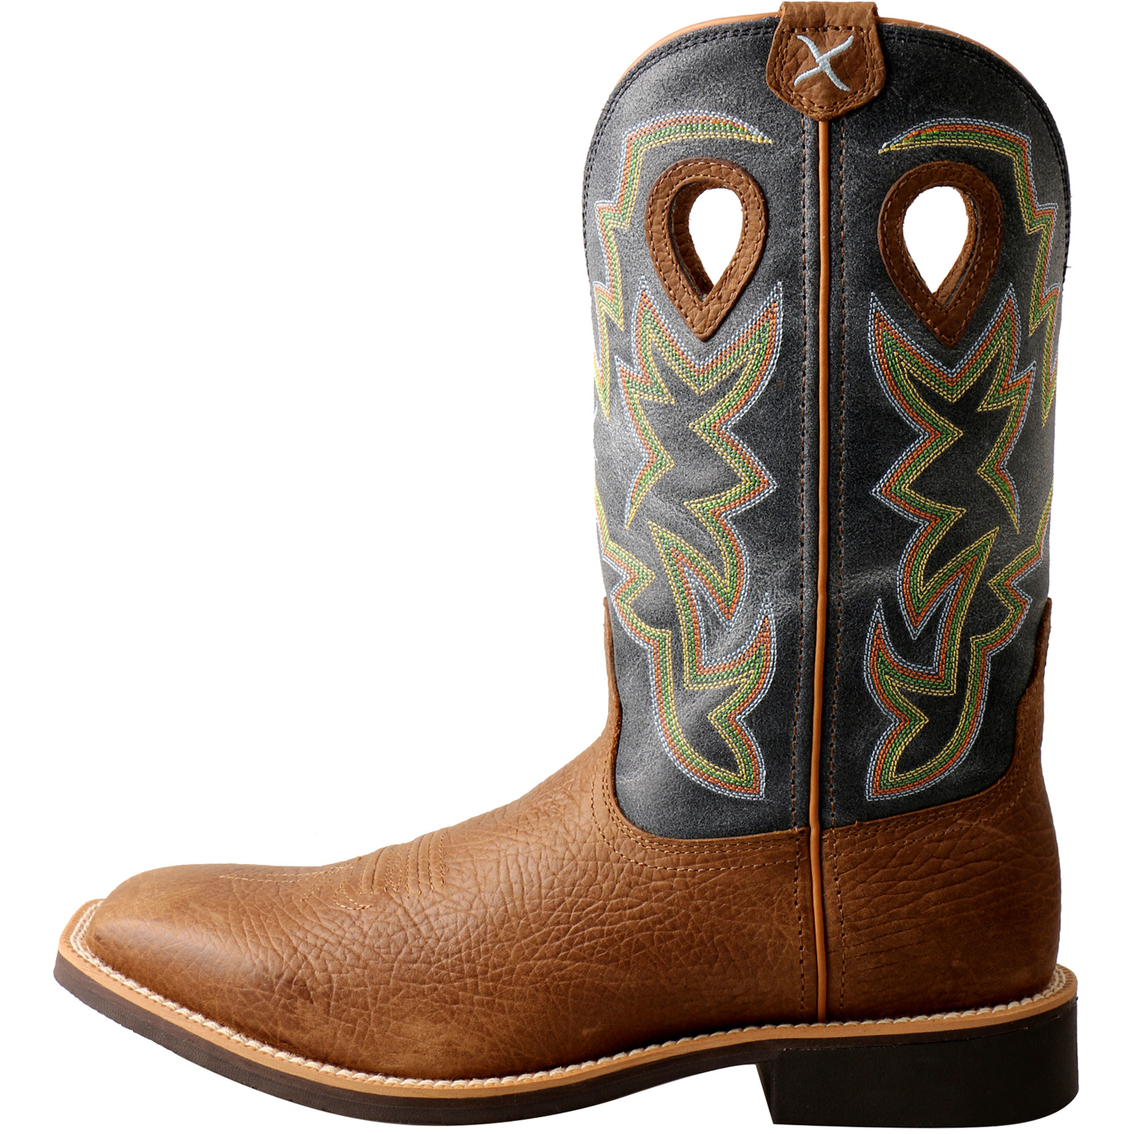 Twisted X Men's Top Hand Peanut Boots - Image 3 of 6